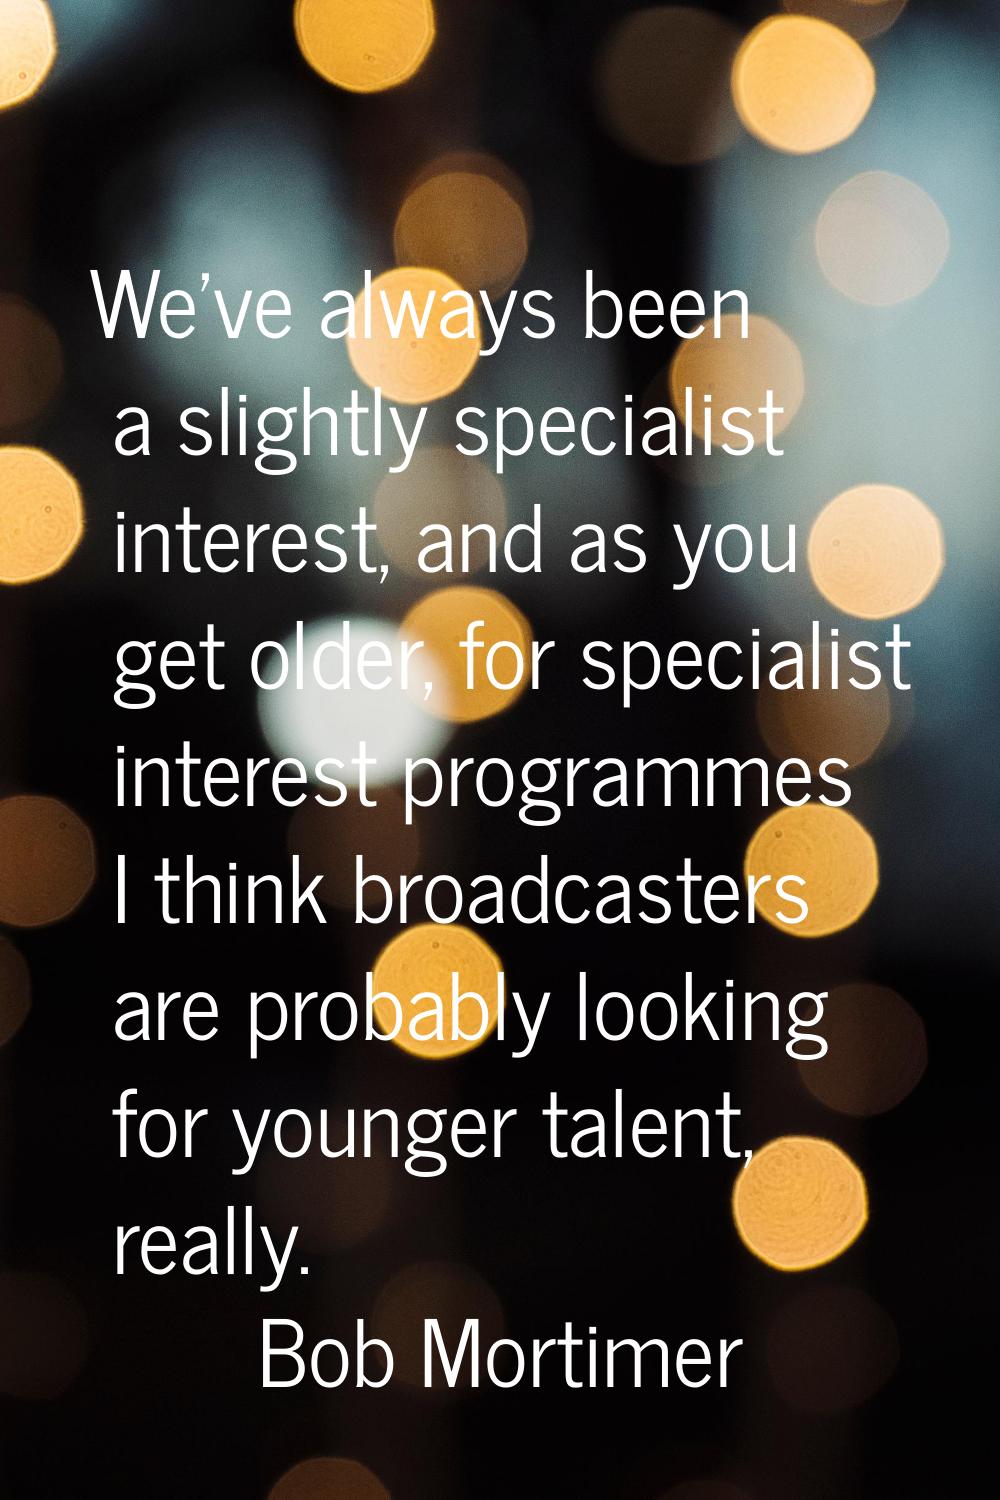 We've always been a slightly specialist interest, and as you get older, for specialist interest pro